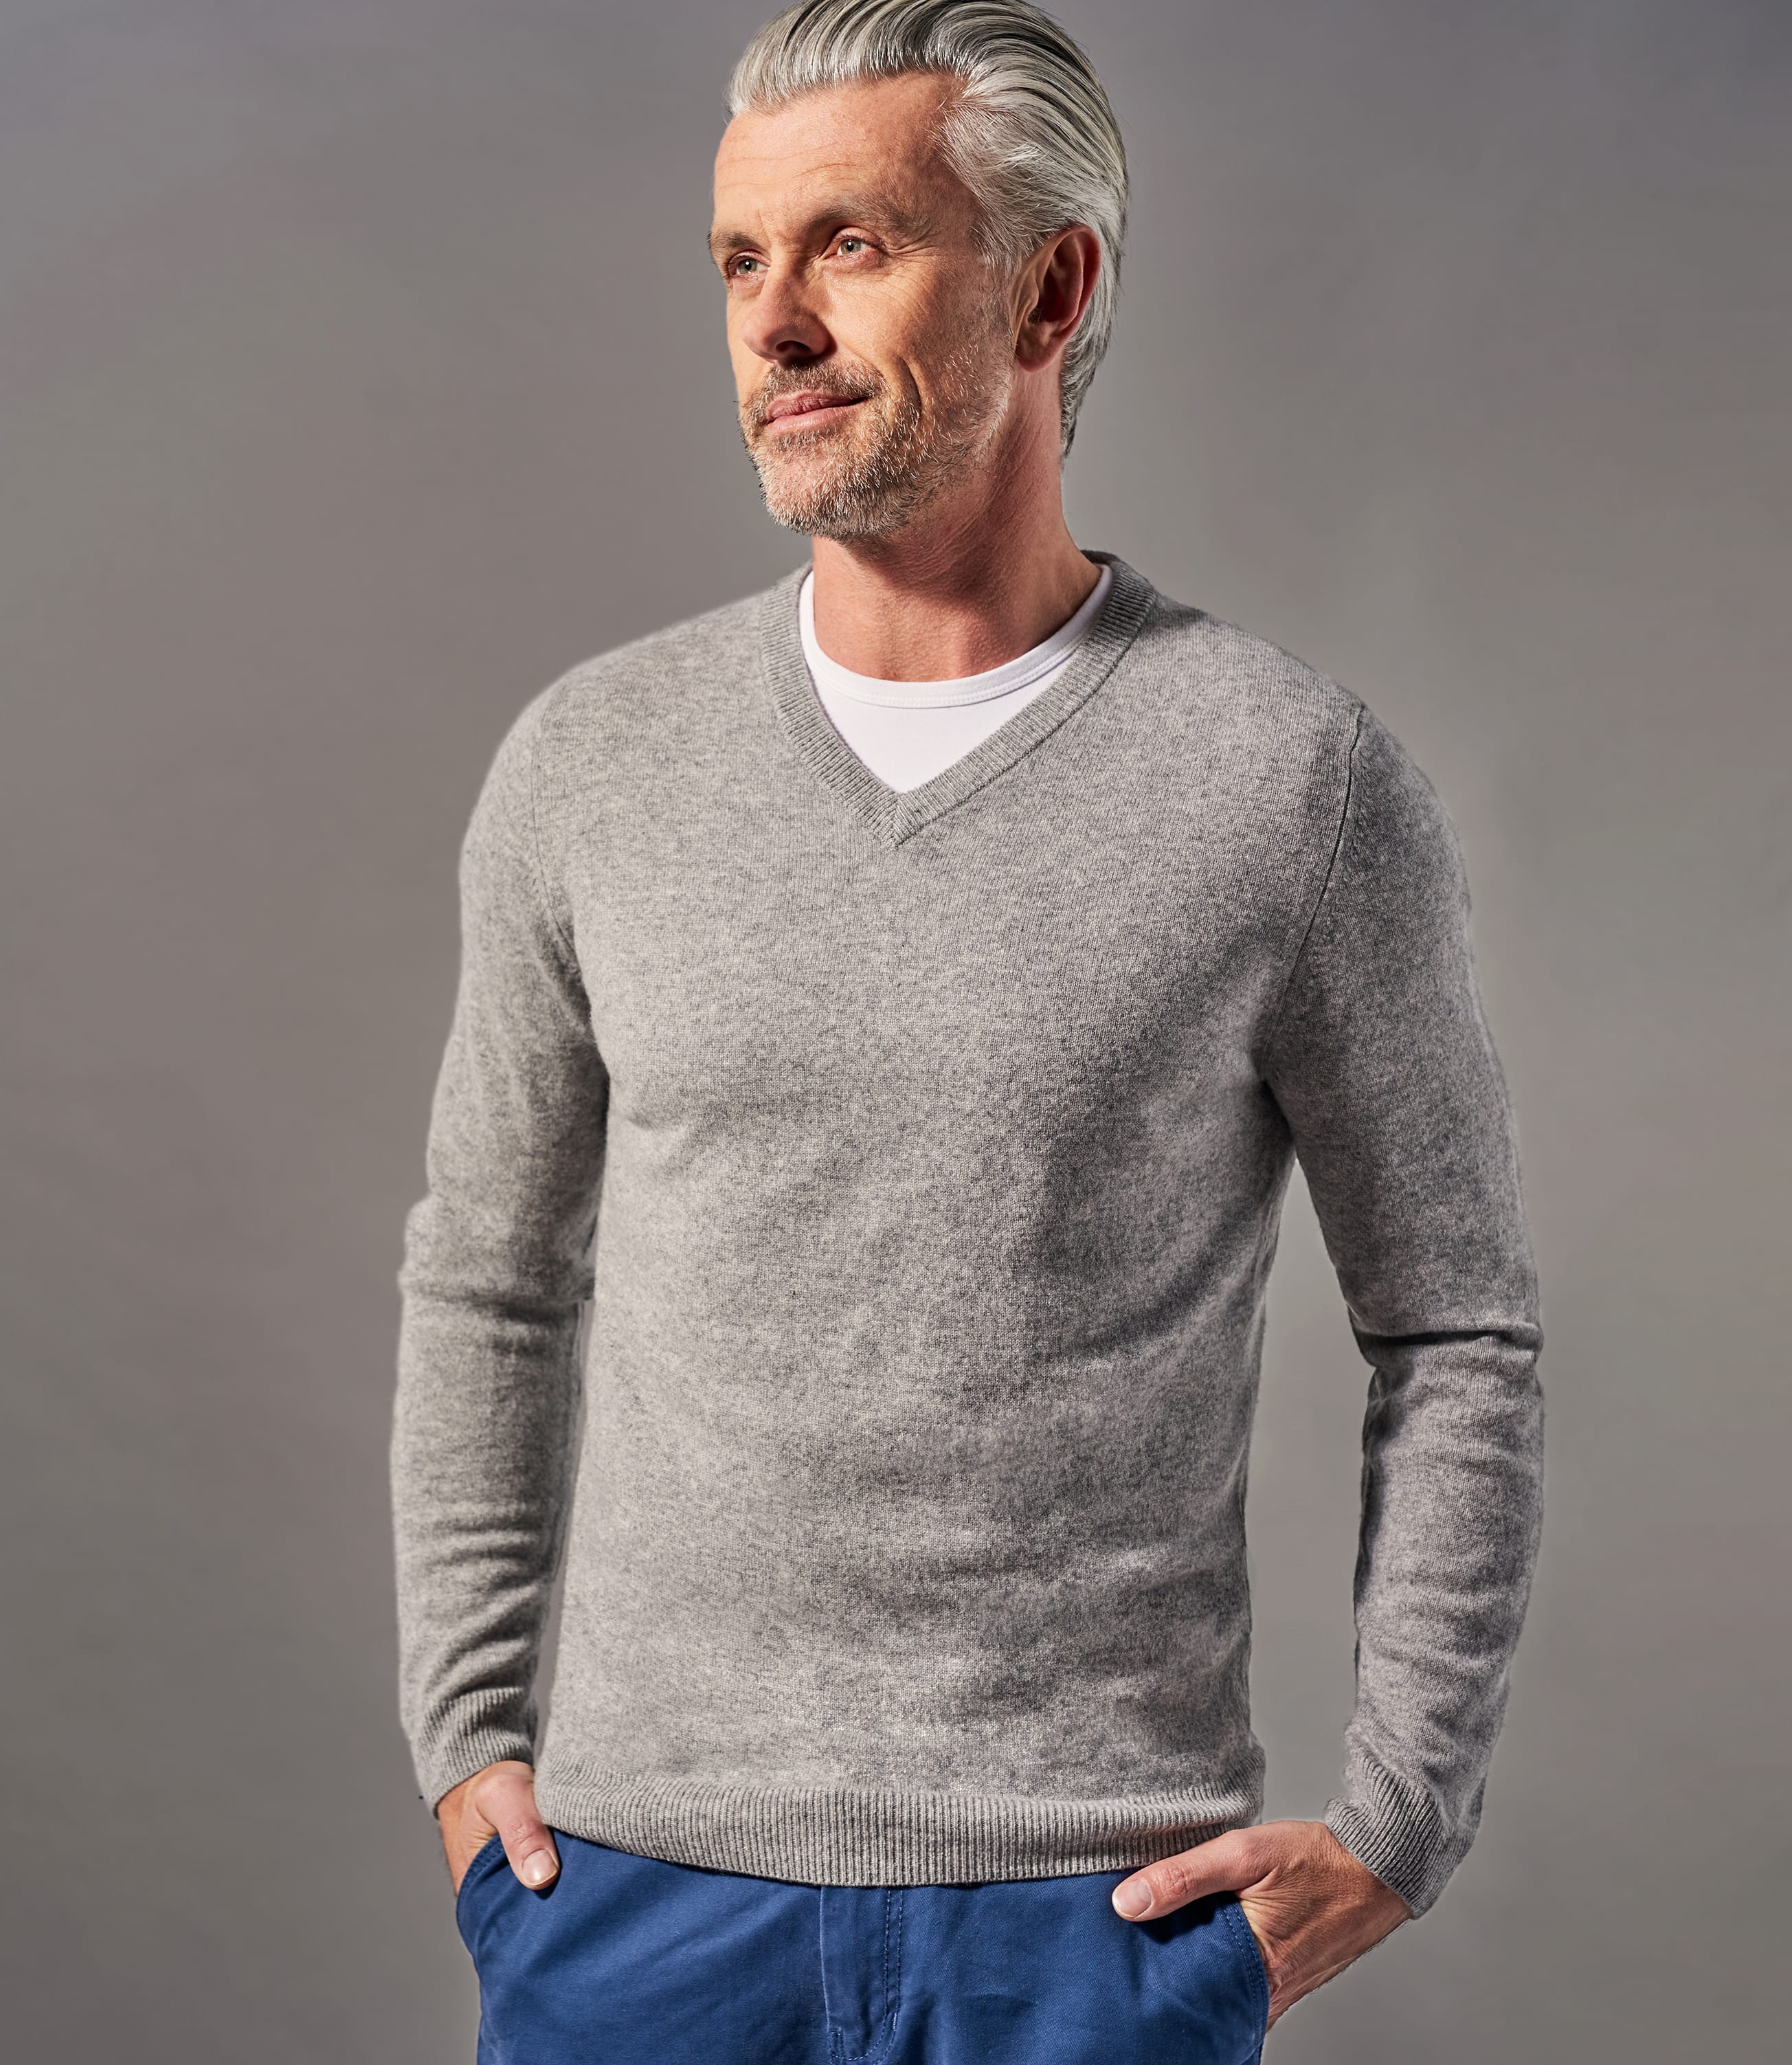 v neck sweater and t shirt